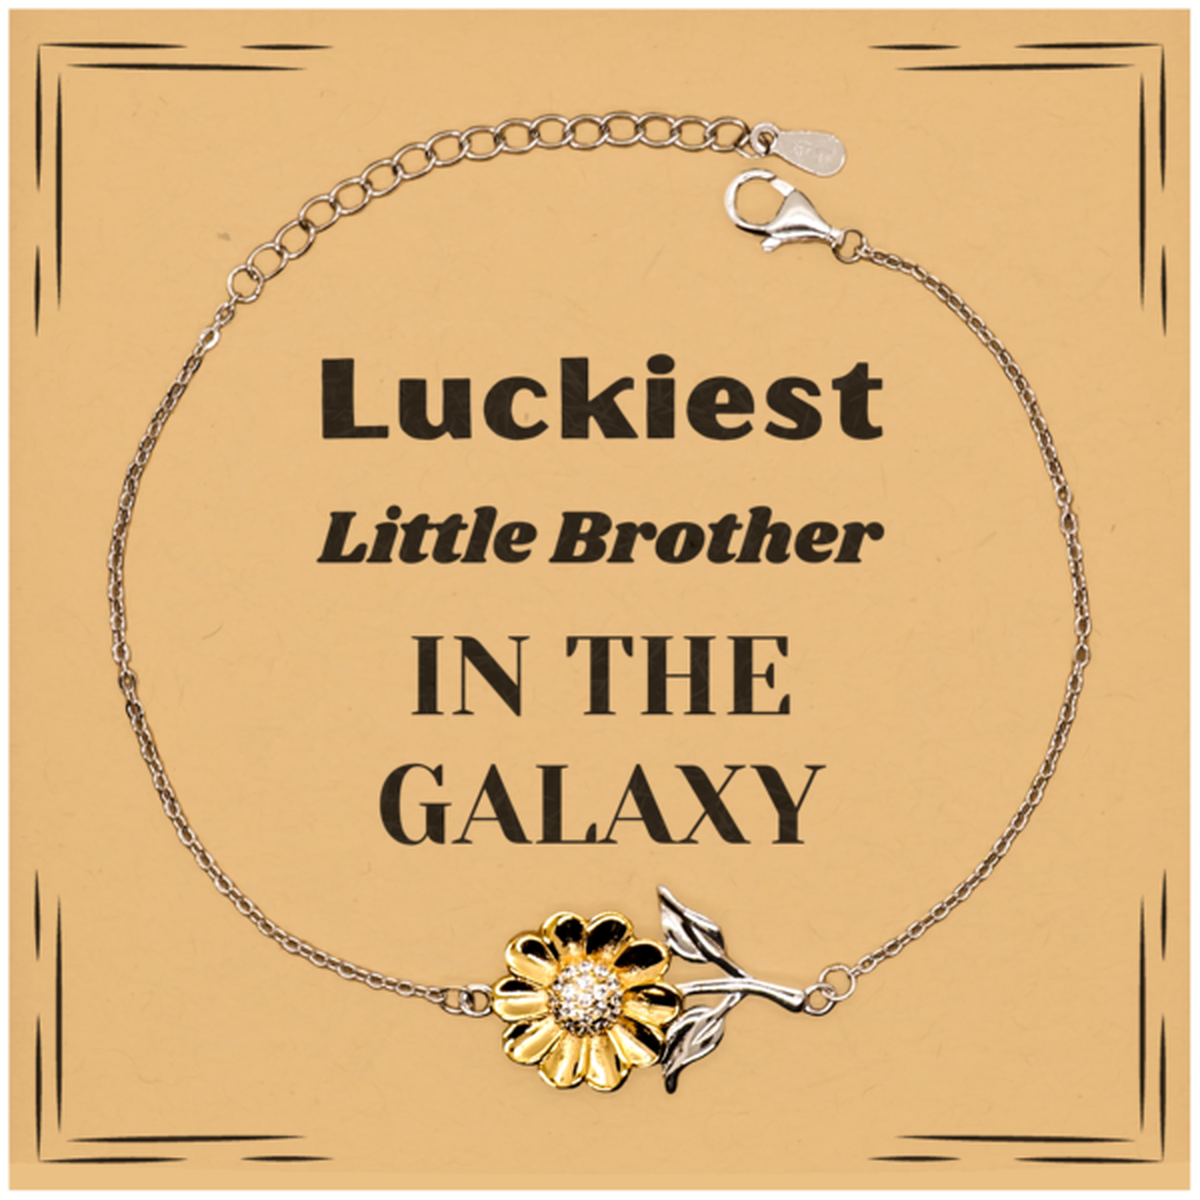 Luckiest Little Brother in the Galaxy, To My Little Brother Message Card Gifts, Christmas Little Brother Sunflower Bracelet Gifts, X-mas Birthday Unique Gifts For Little Brother Men Women